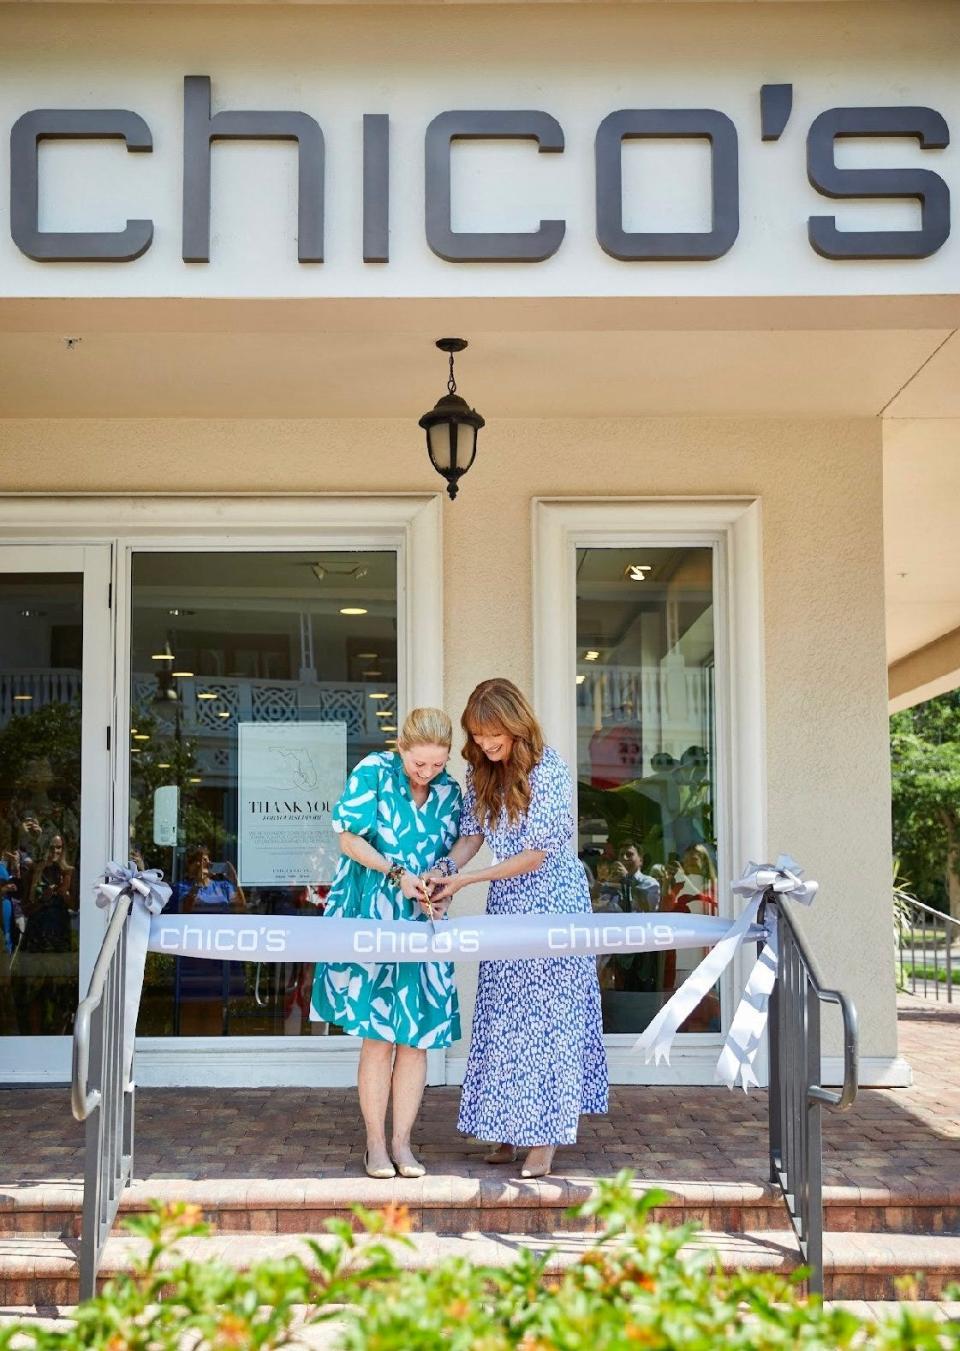 Film and television actress Jane Seymour attended the June 2, 2023, ribbon-cutting and VIP open house at Chico's, which reopened following Hurricane Ian that struck Southwest Florida on Sept. 28, 2022. The storm damaged Chico's and many businesses along Fifth Avenue South in downtown Naples. (Photo by Kristy Horst)